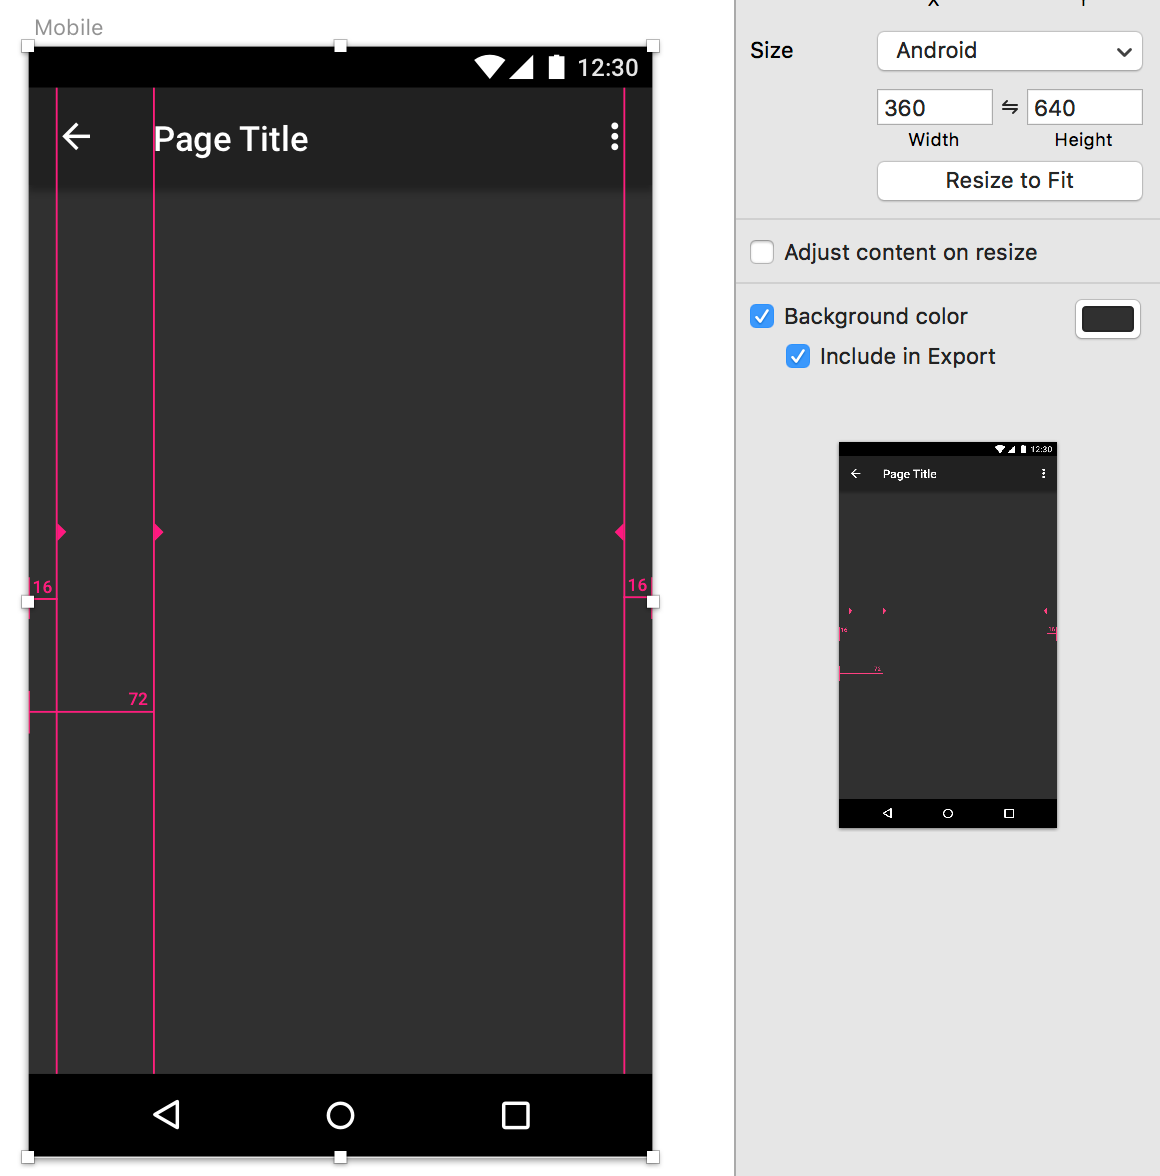 Drawing Grid For The Artist APK for Android - Download